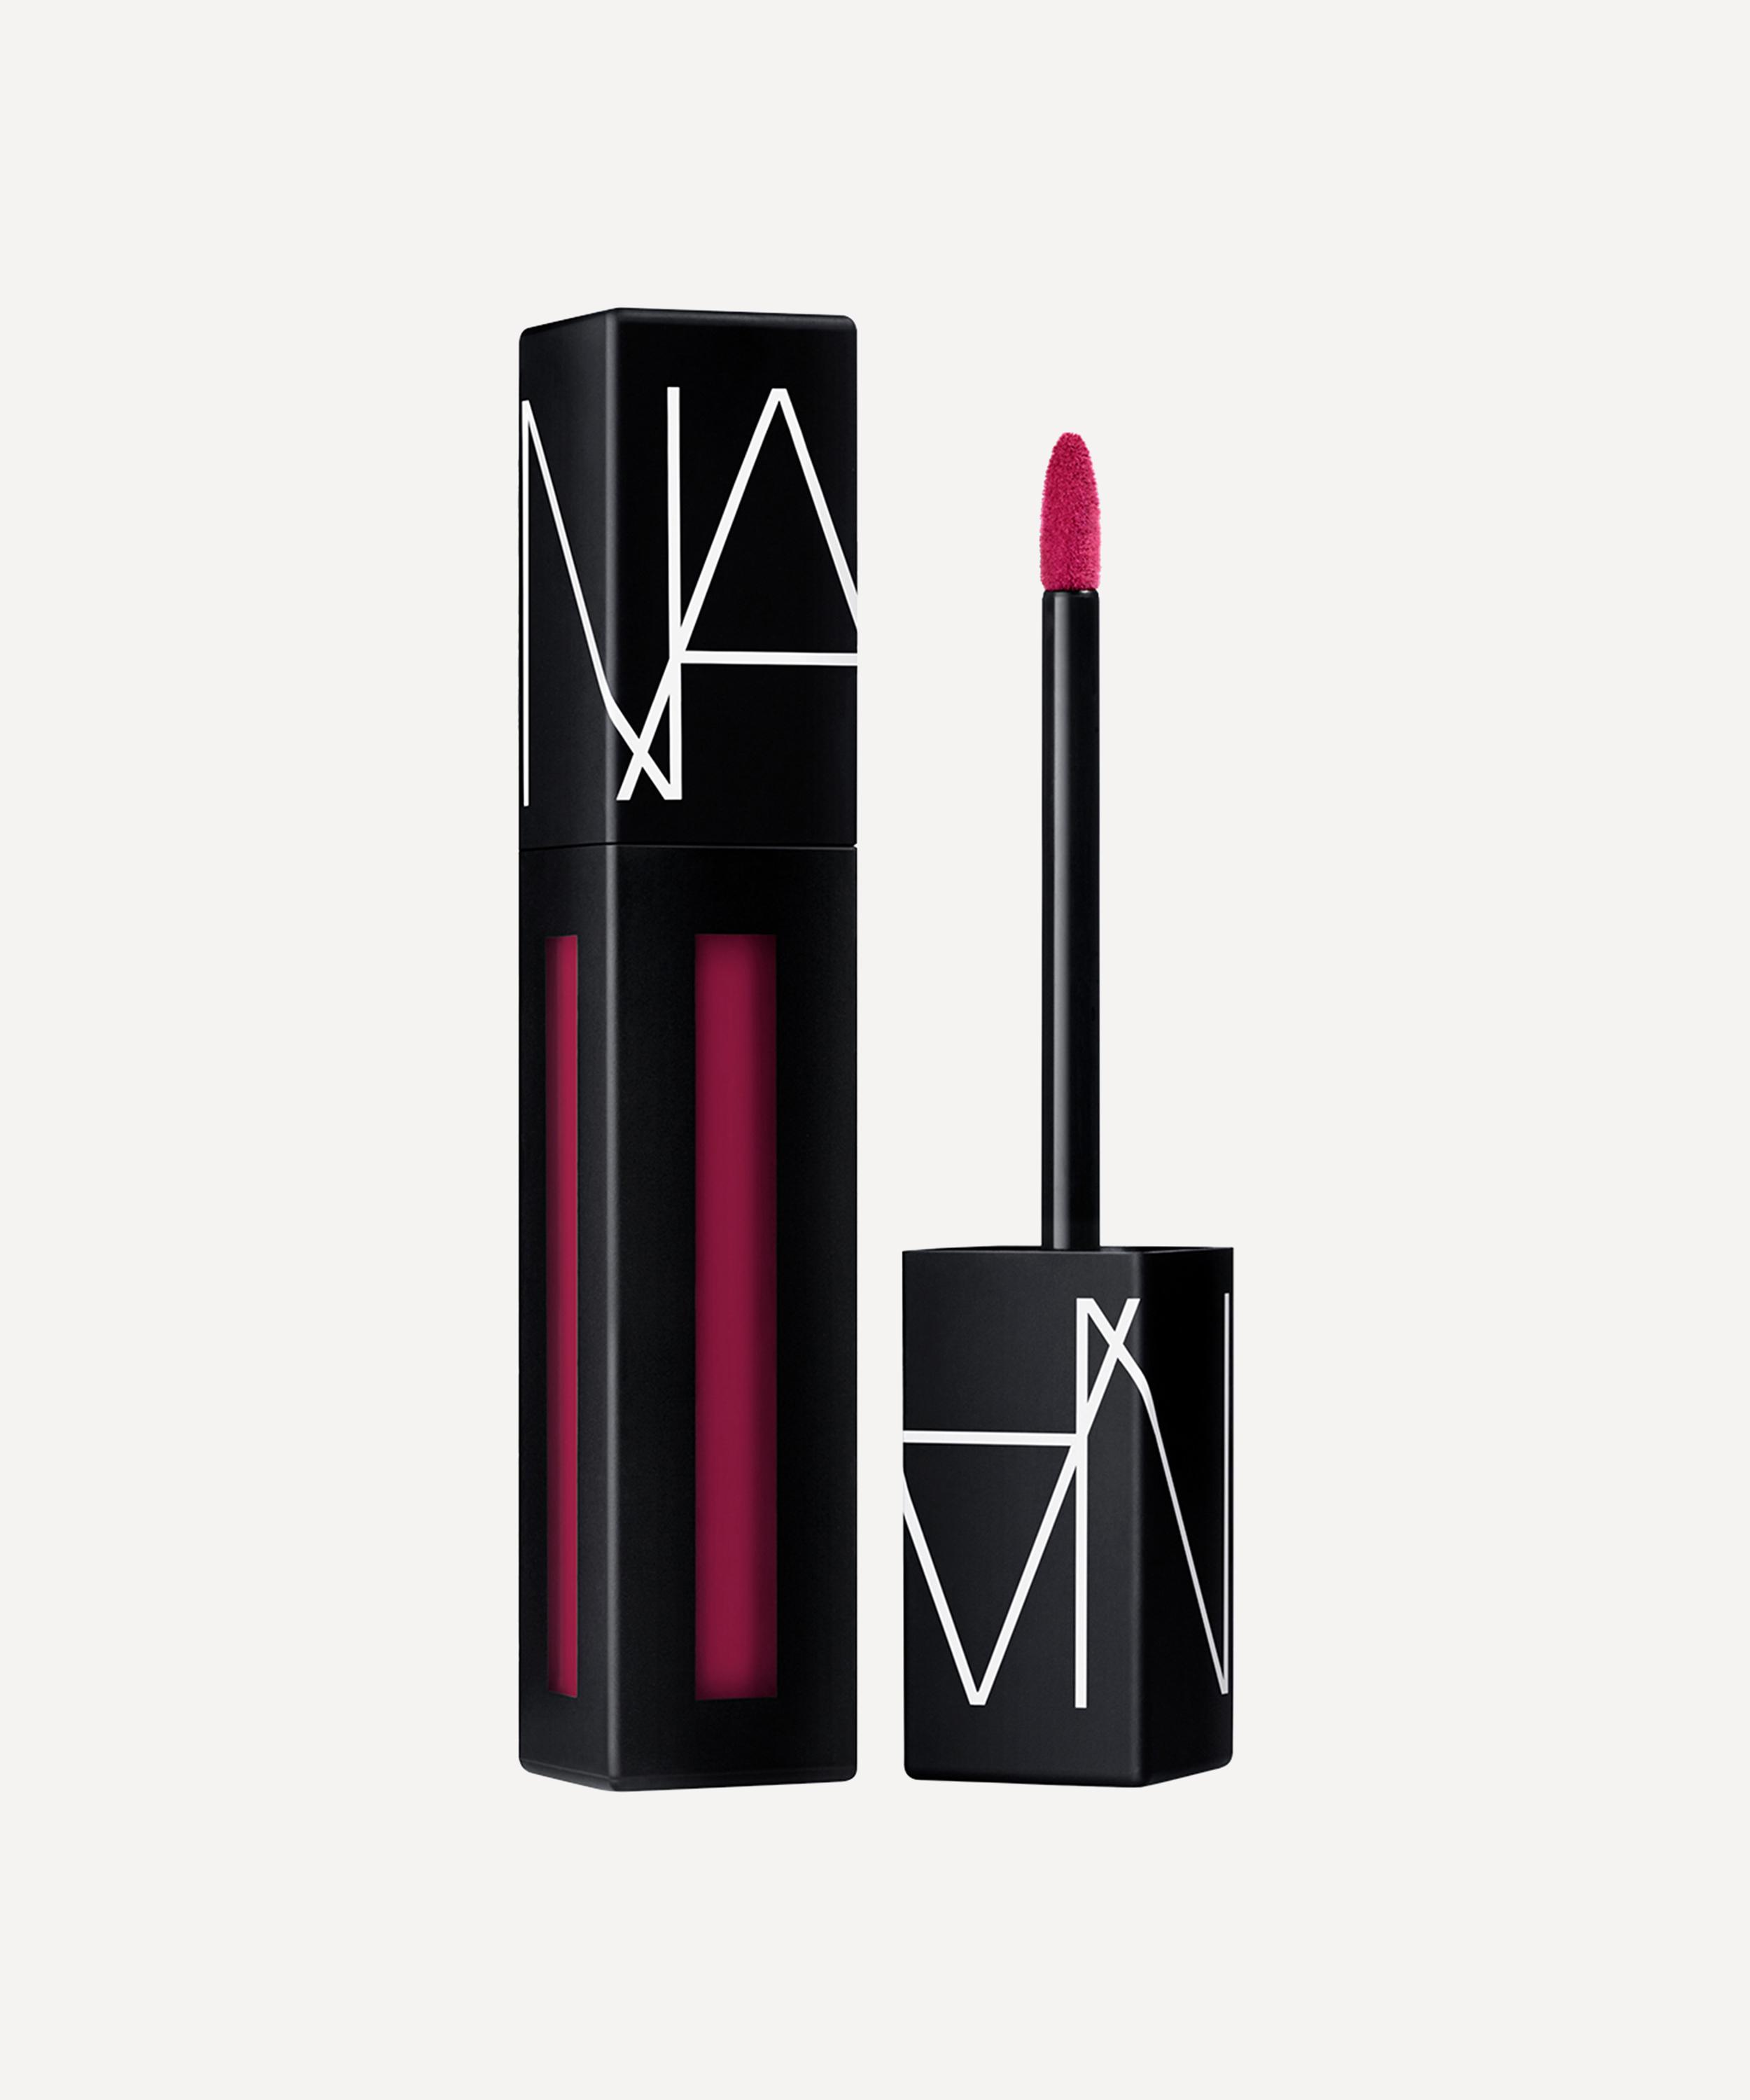 NARS POWERMATTE LIP PIGMENT IN GIVE IT UP,000564678